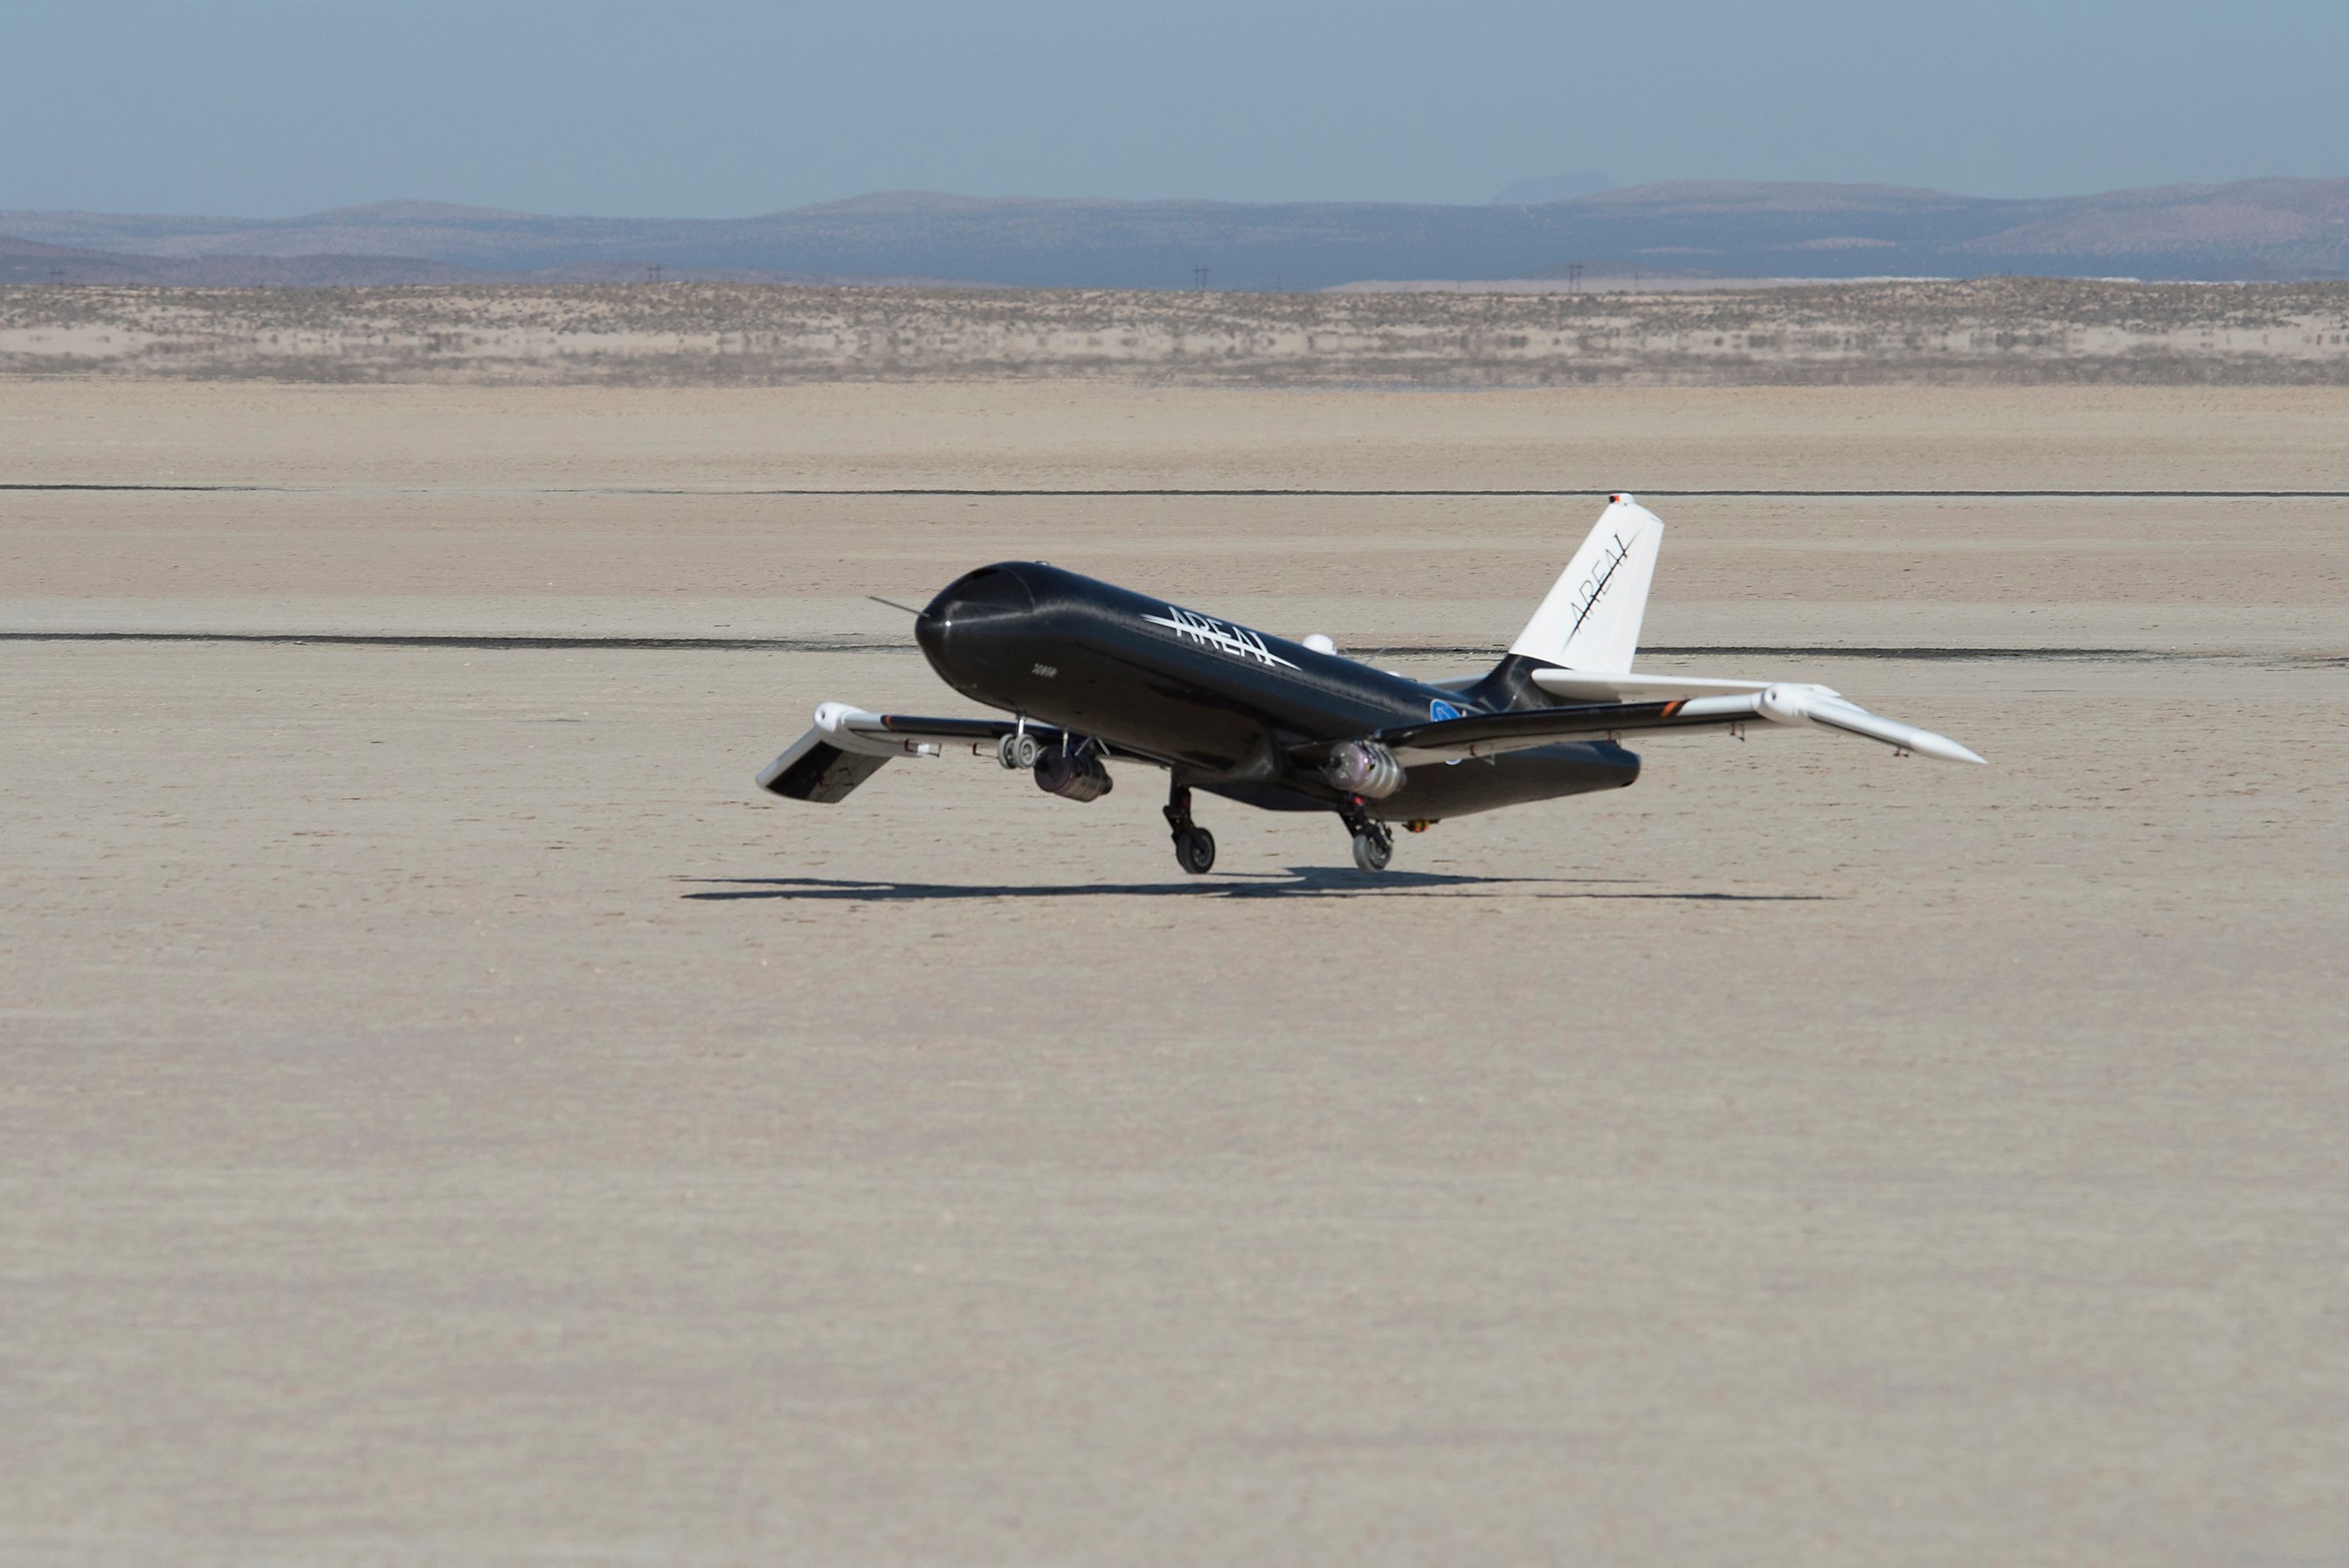 The folding wings were deployed on a remote-controlled drone testbed called Prototype Technology-Evaluation Research Aircraft (PTERA). Source: NASA / Ken Ulbrich